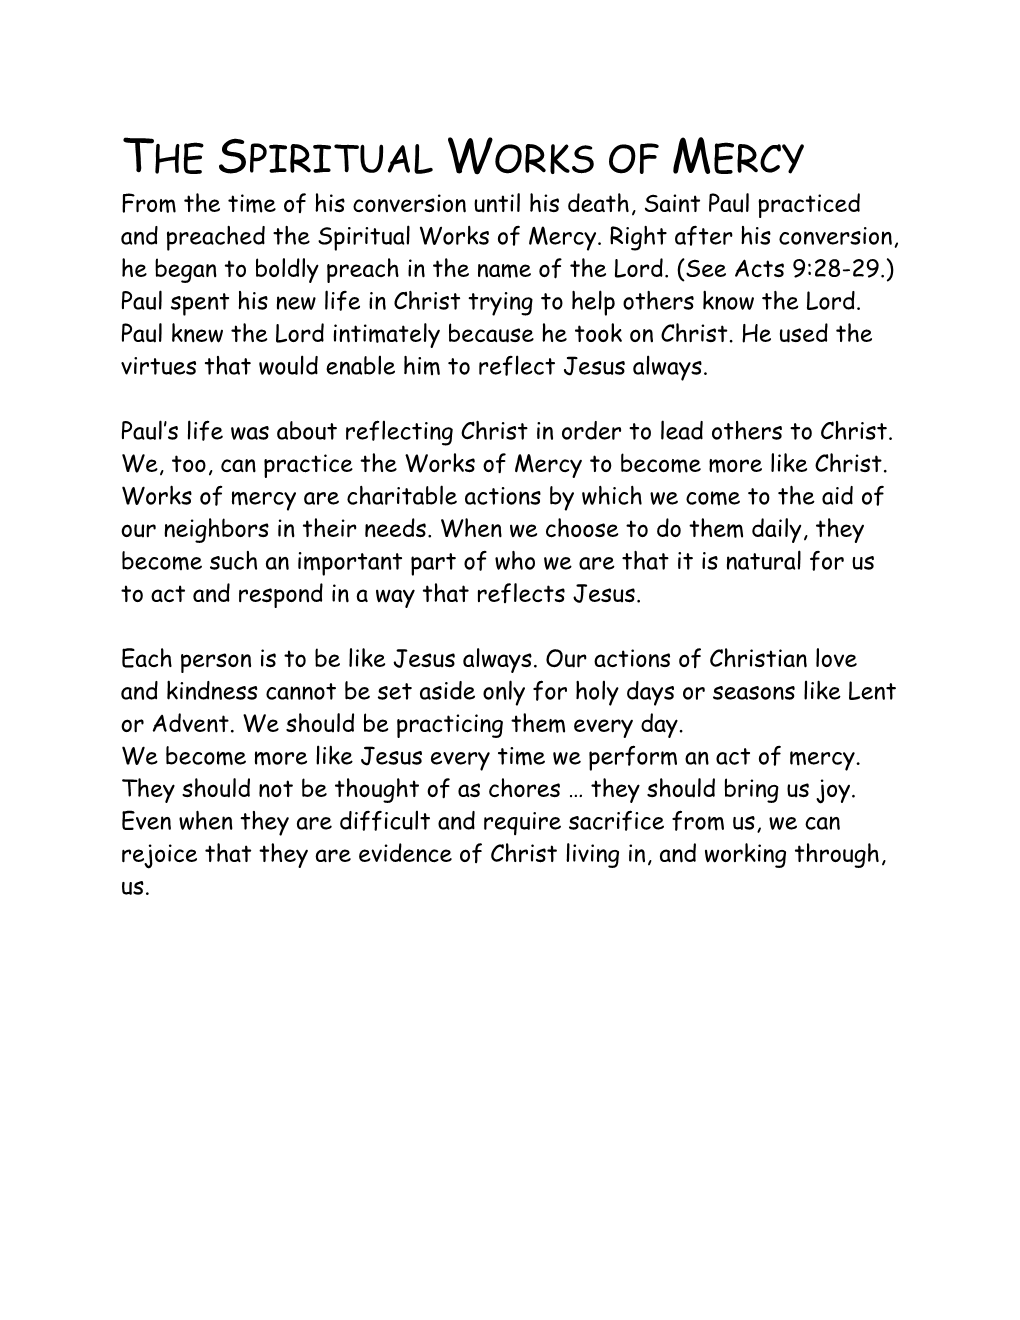 The Spiritual Works of Mercy